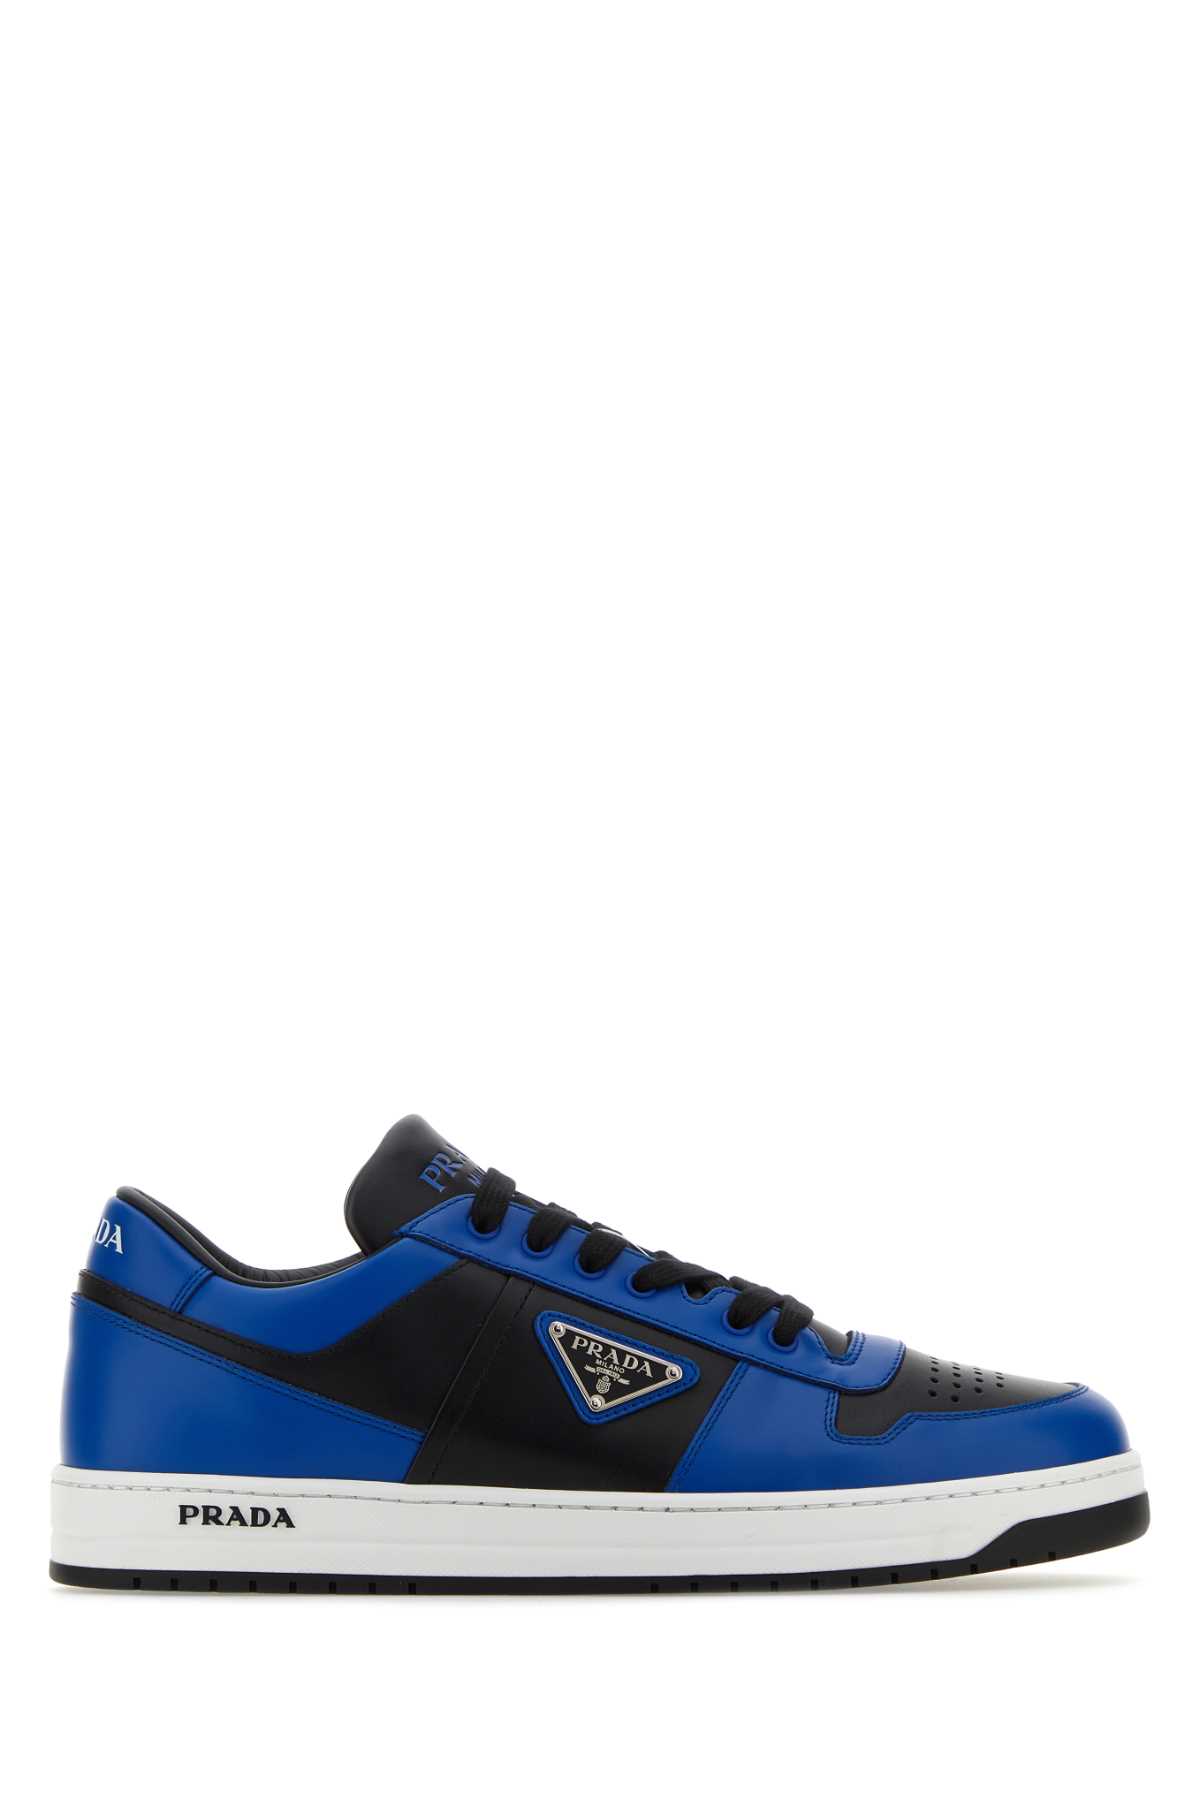 Prada Two-tone Leather Downtown Sneakers In Blue